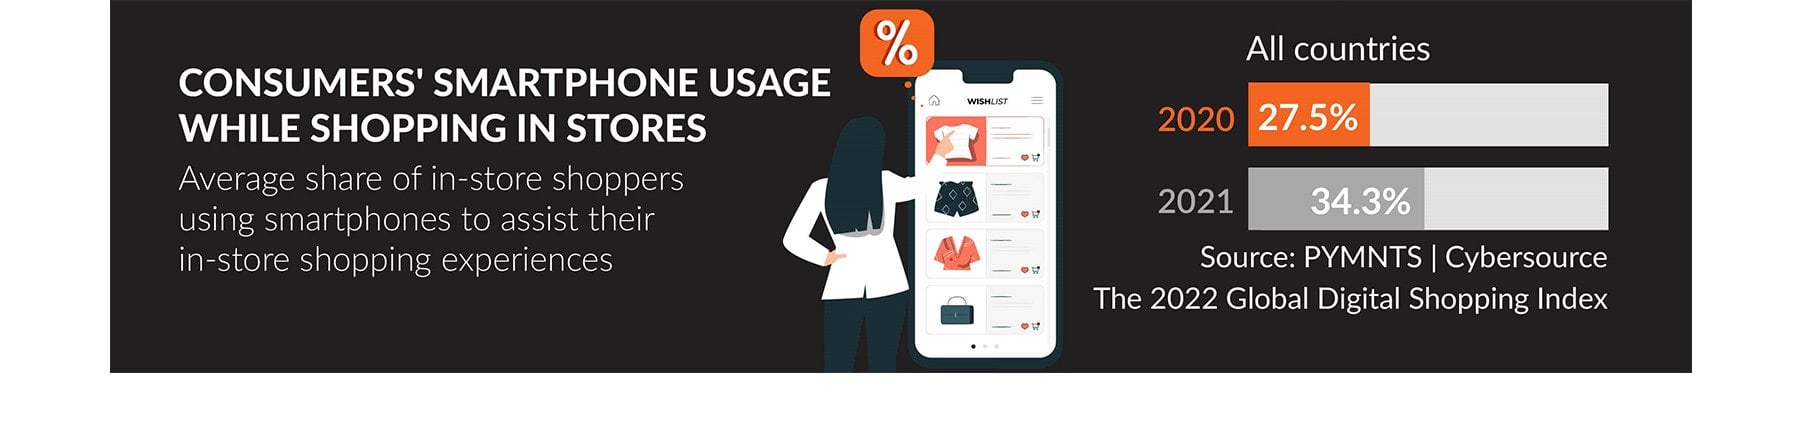 consumers smartphone usage while shopping in stores